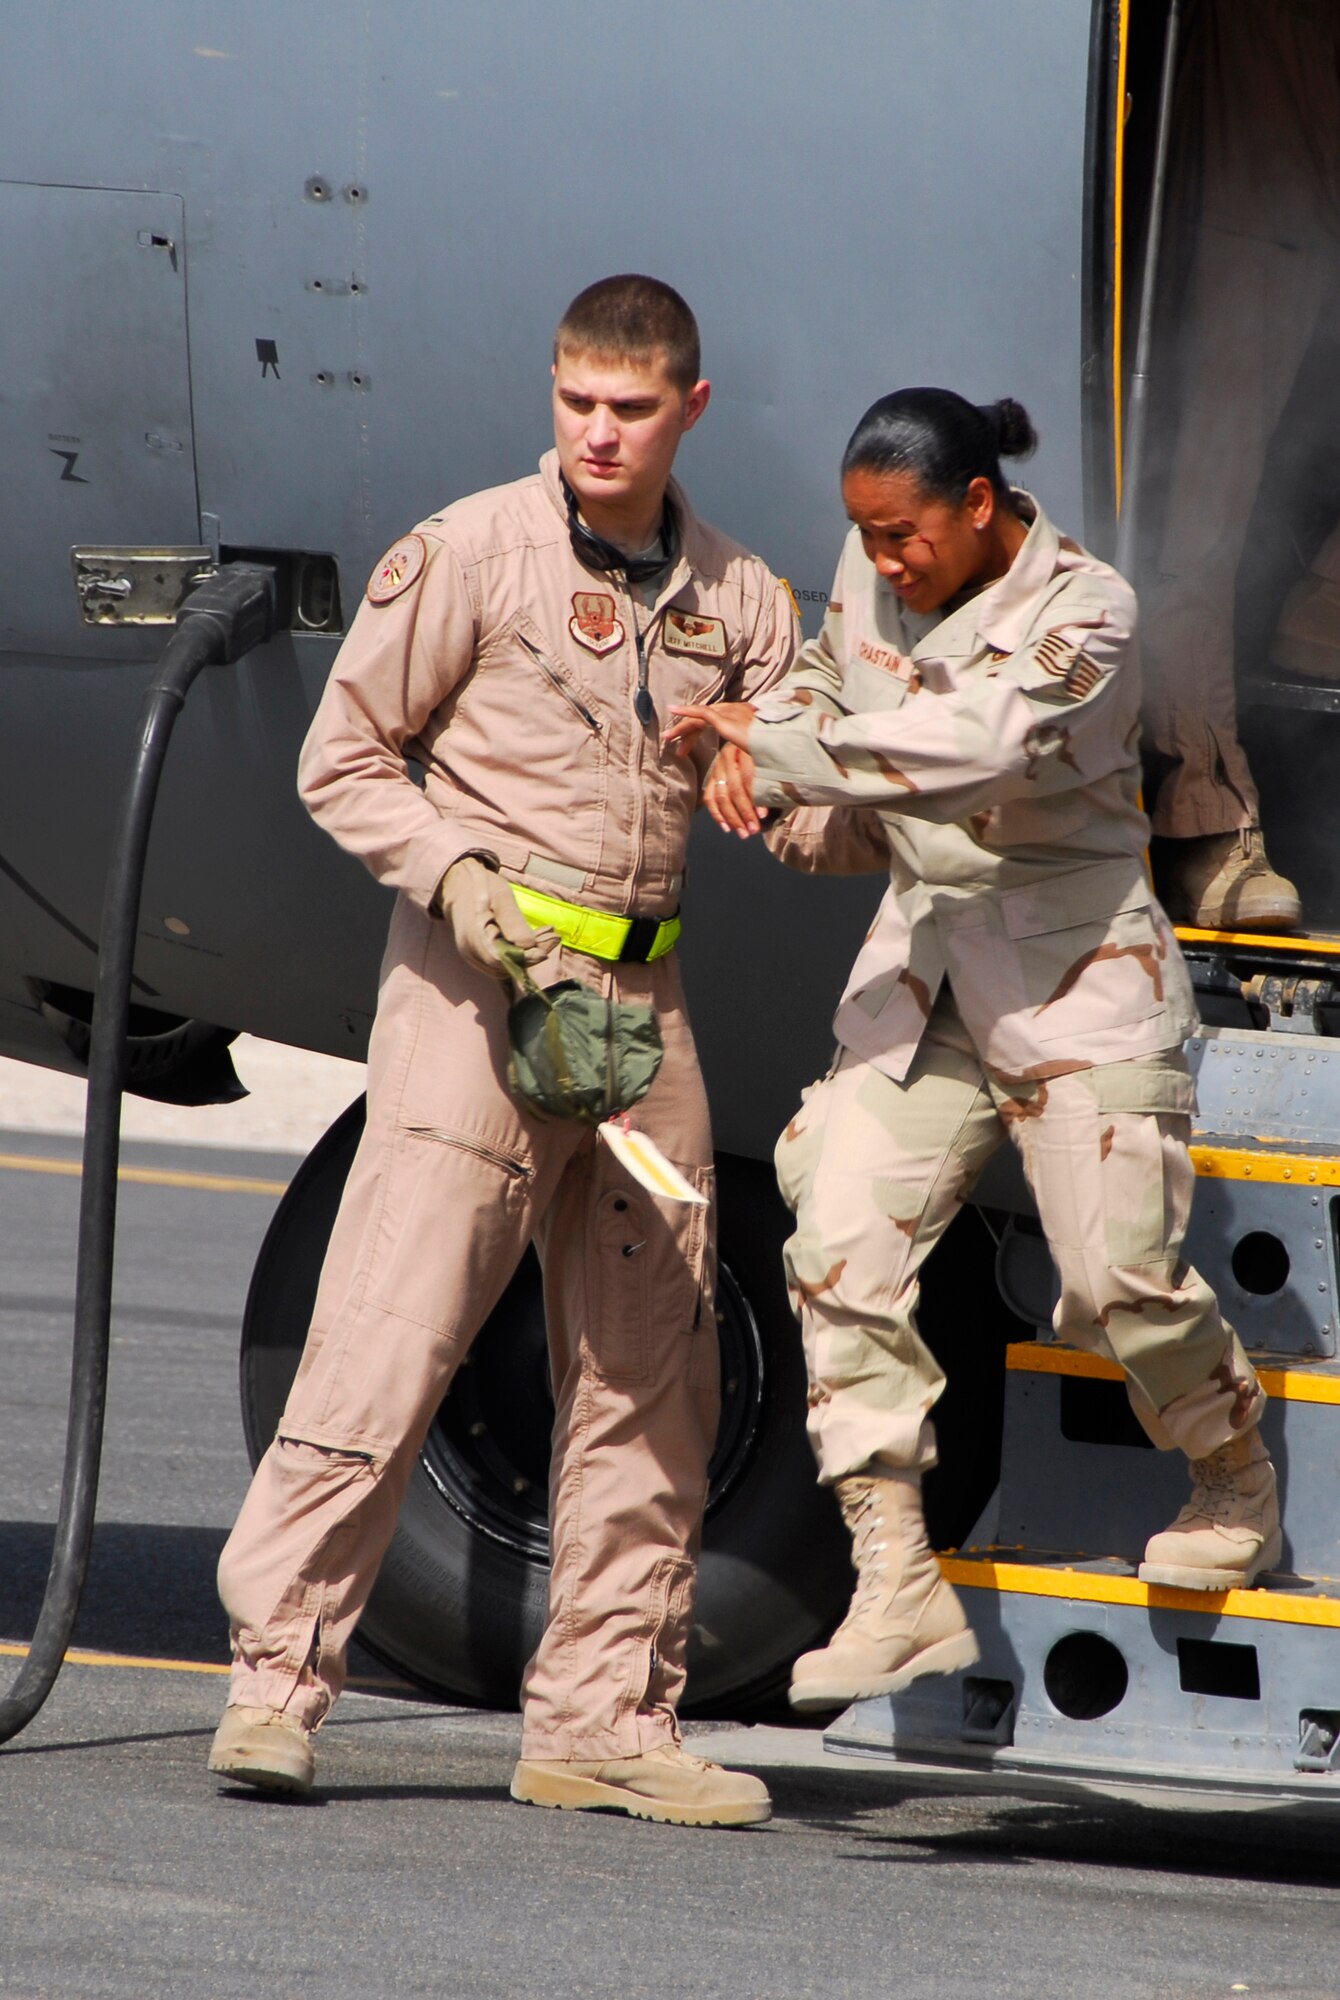 SOUTHWEST ASIA -- First Lt. Jeffrey Mitchell, a C-130 Hercules aircraft navigator deployed to the 737th Expeditionary Airlift Squadron, helps an injured passenger from the disabled aircraft June 26, 2008, during a major accident response exercise at an air base in the Persian Gulf Region. As part of the C-130 crew responsibilities, the crew makes sure that all of their passengers are directed off of the aircraft and away from any further dangers. The purpose of the MARE is to evaluate the Wing's ability to respond to and recover from an aircraft mishap and mass casualty incident. (U.S. Air Force photo/ Staff Sgt. Patrick Dixon)